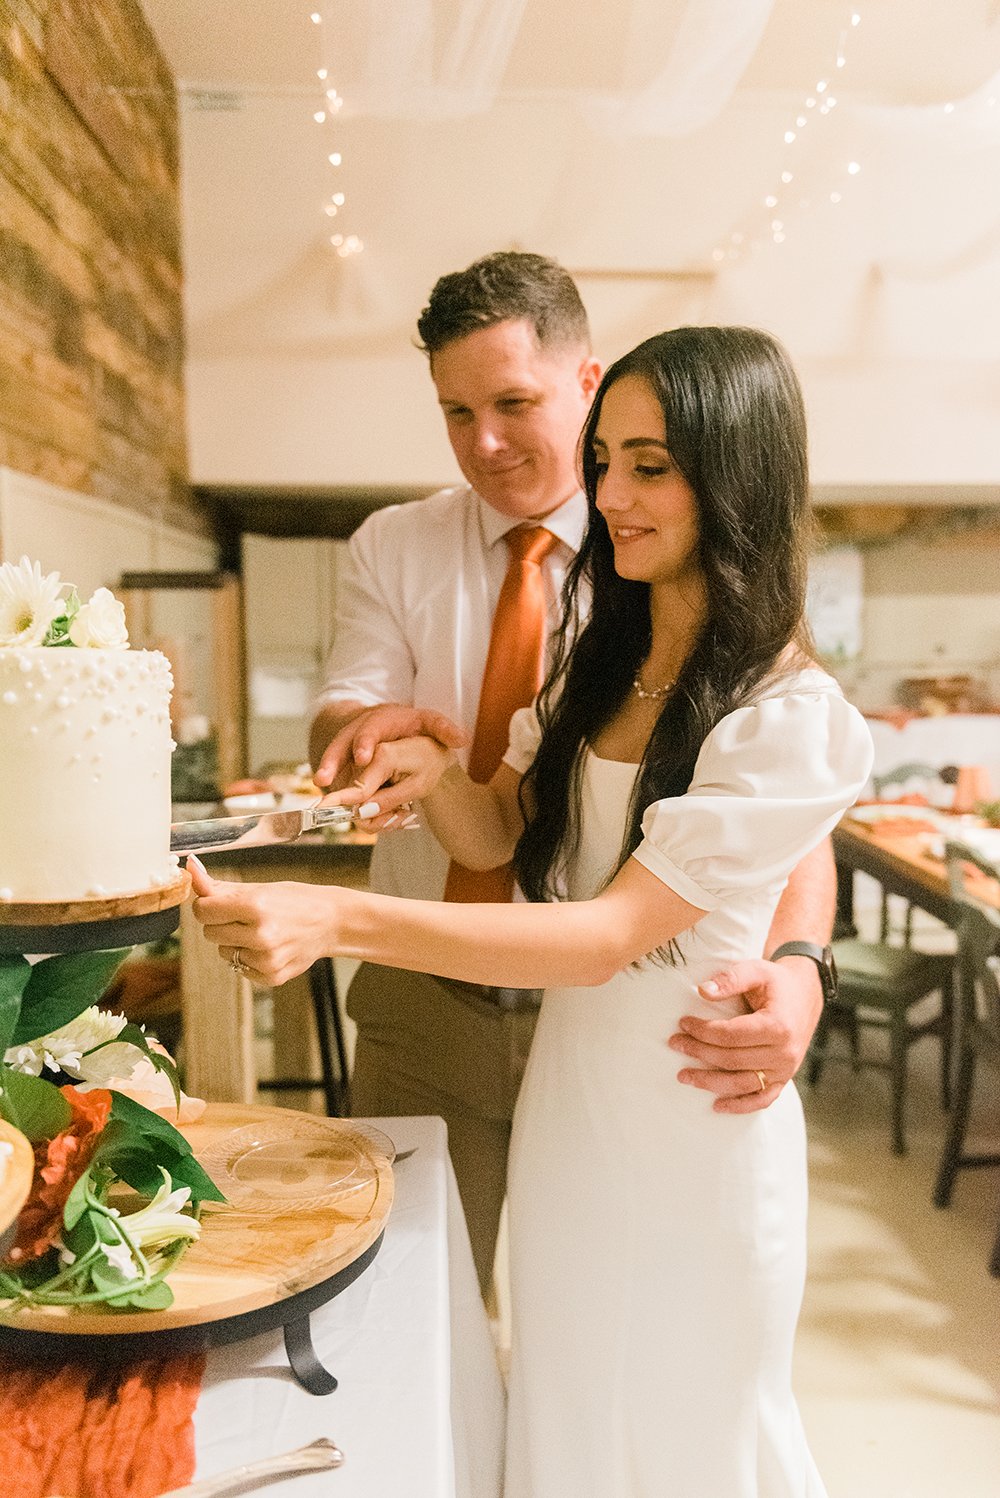  A bride and groom cut their wedding cake together at their reception photographed by Jacquie Erickson, an Atlanta-based wedding photographer. wedding must-haves document your wedding #atlantaweddingphotographer #memorablewedding #weddingparty #georg